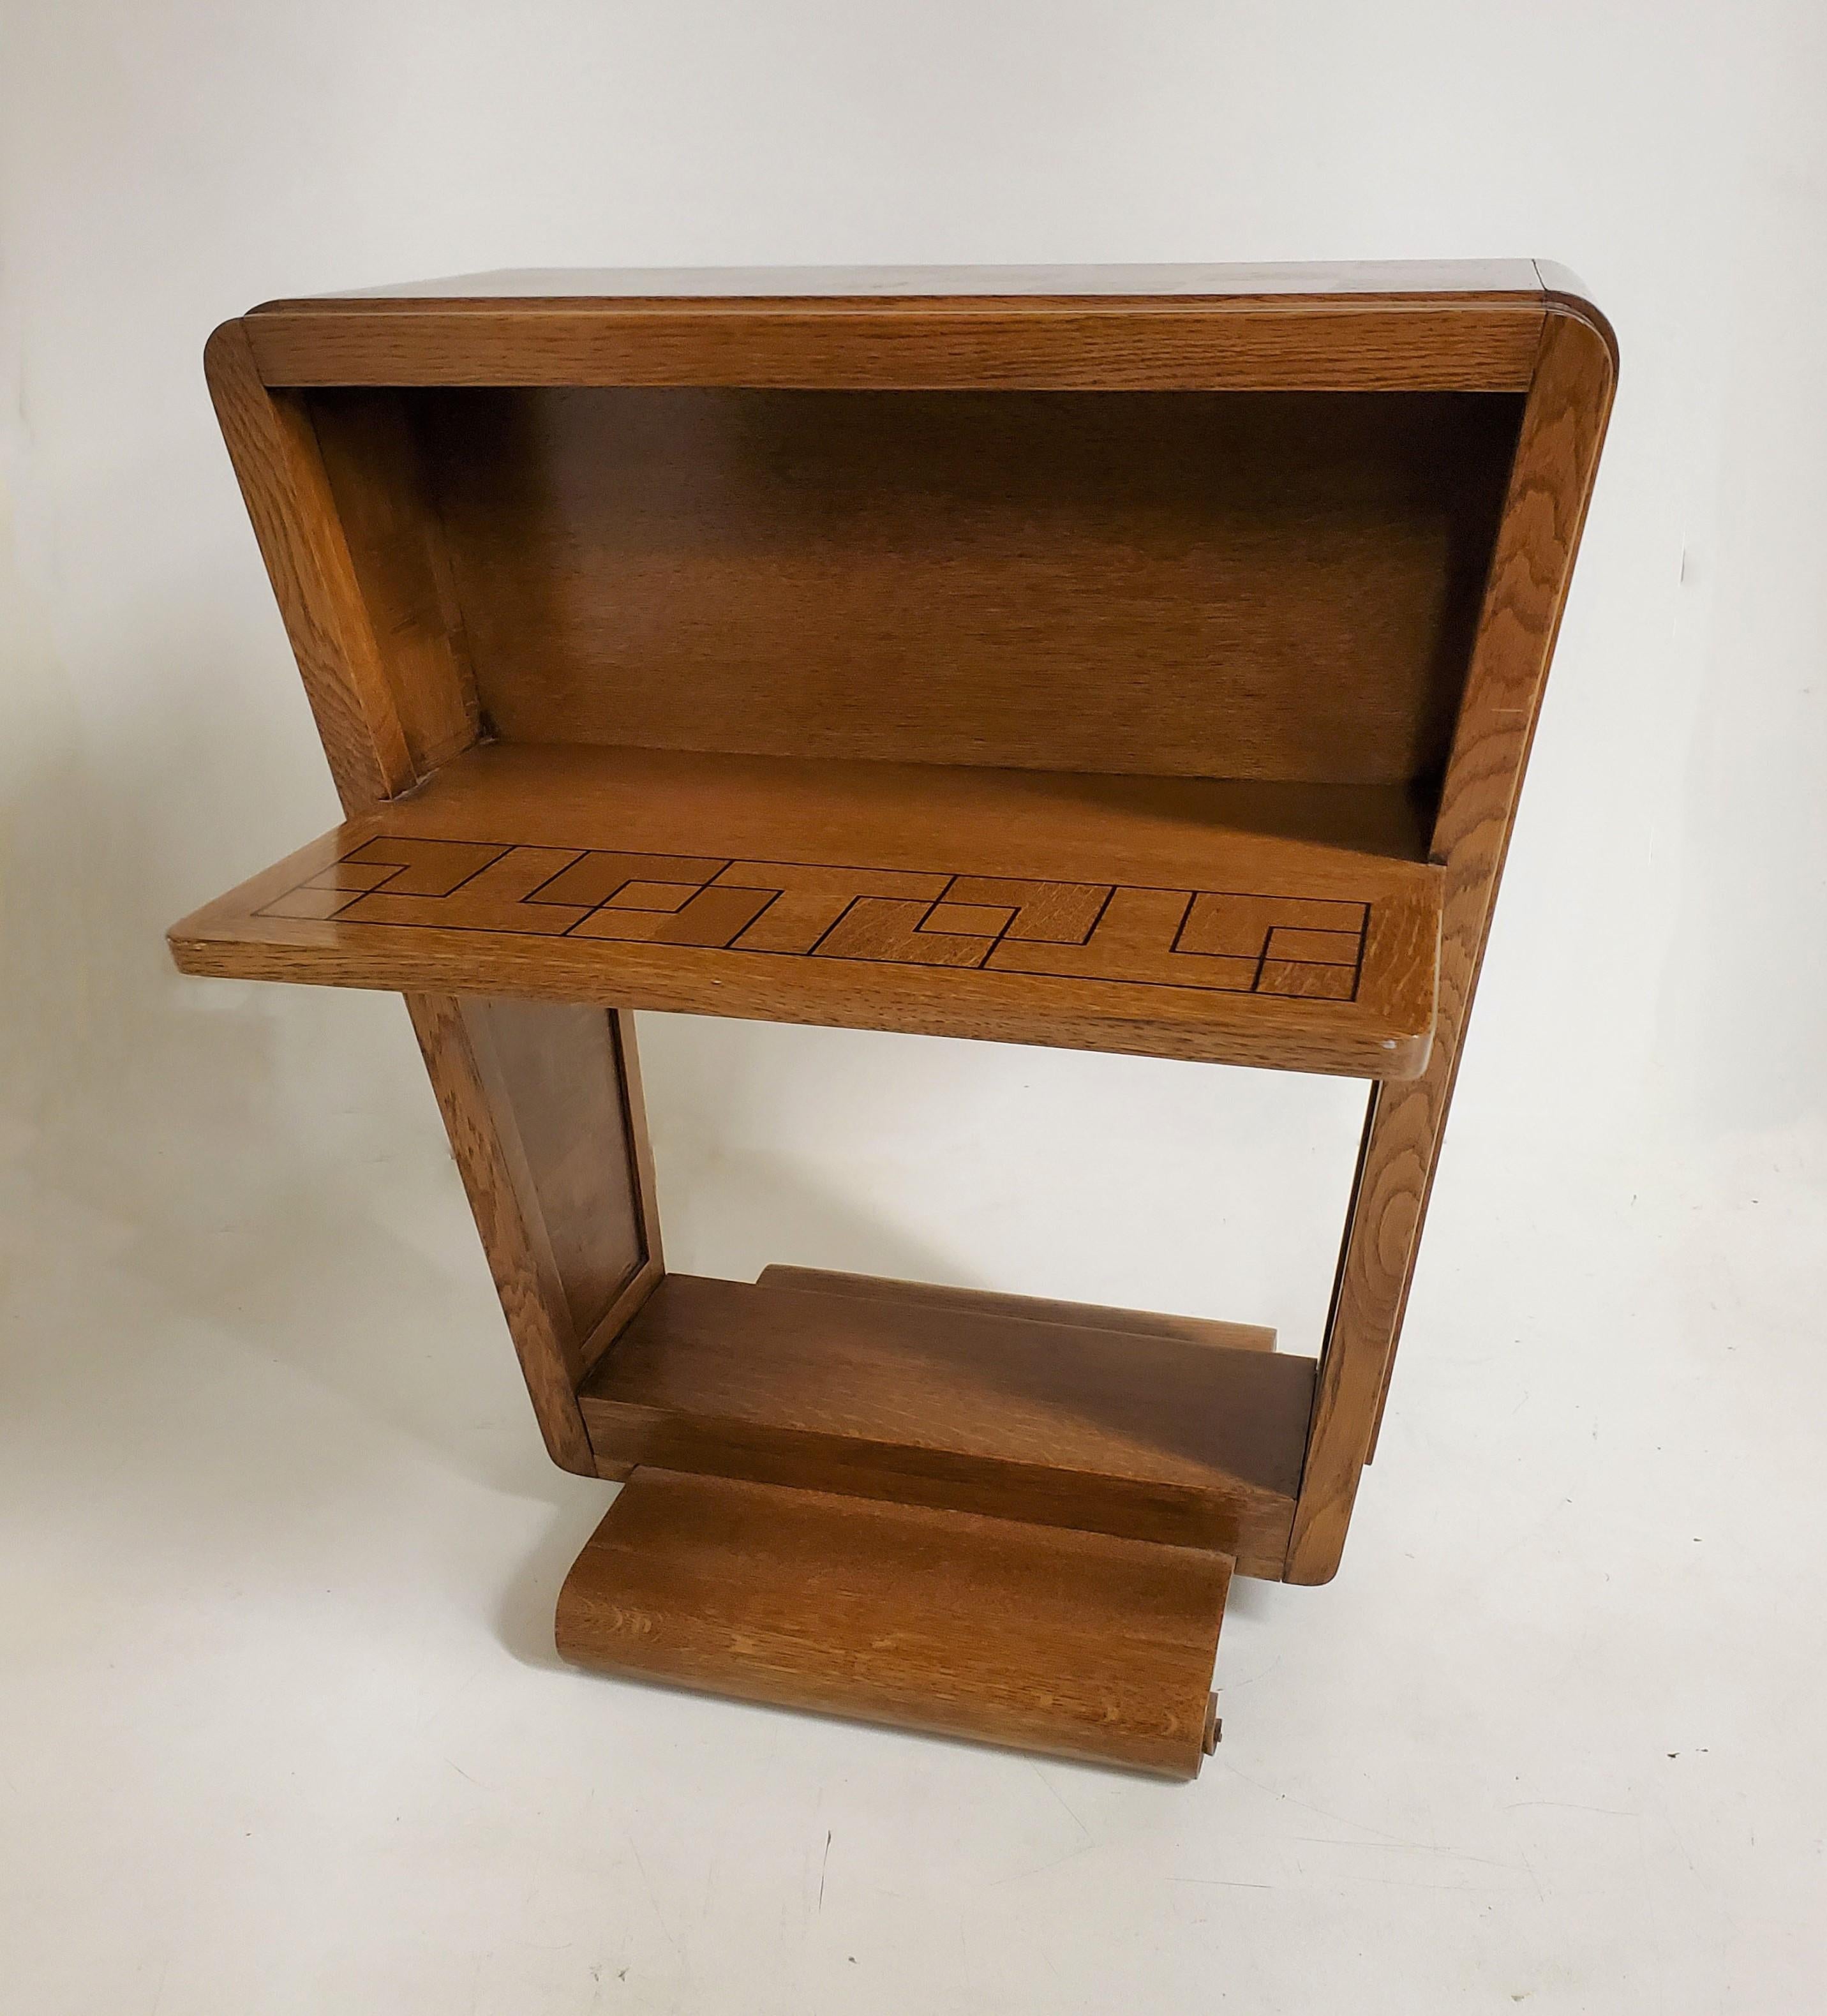 A rare and unusual Modernist side/ end table of cubist design with parquetry inlaid top, radius corners, angular side planks, and two fixed shelfs, the whole ending with a carved decorative scroll at each corner of the base. Attributed to André